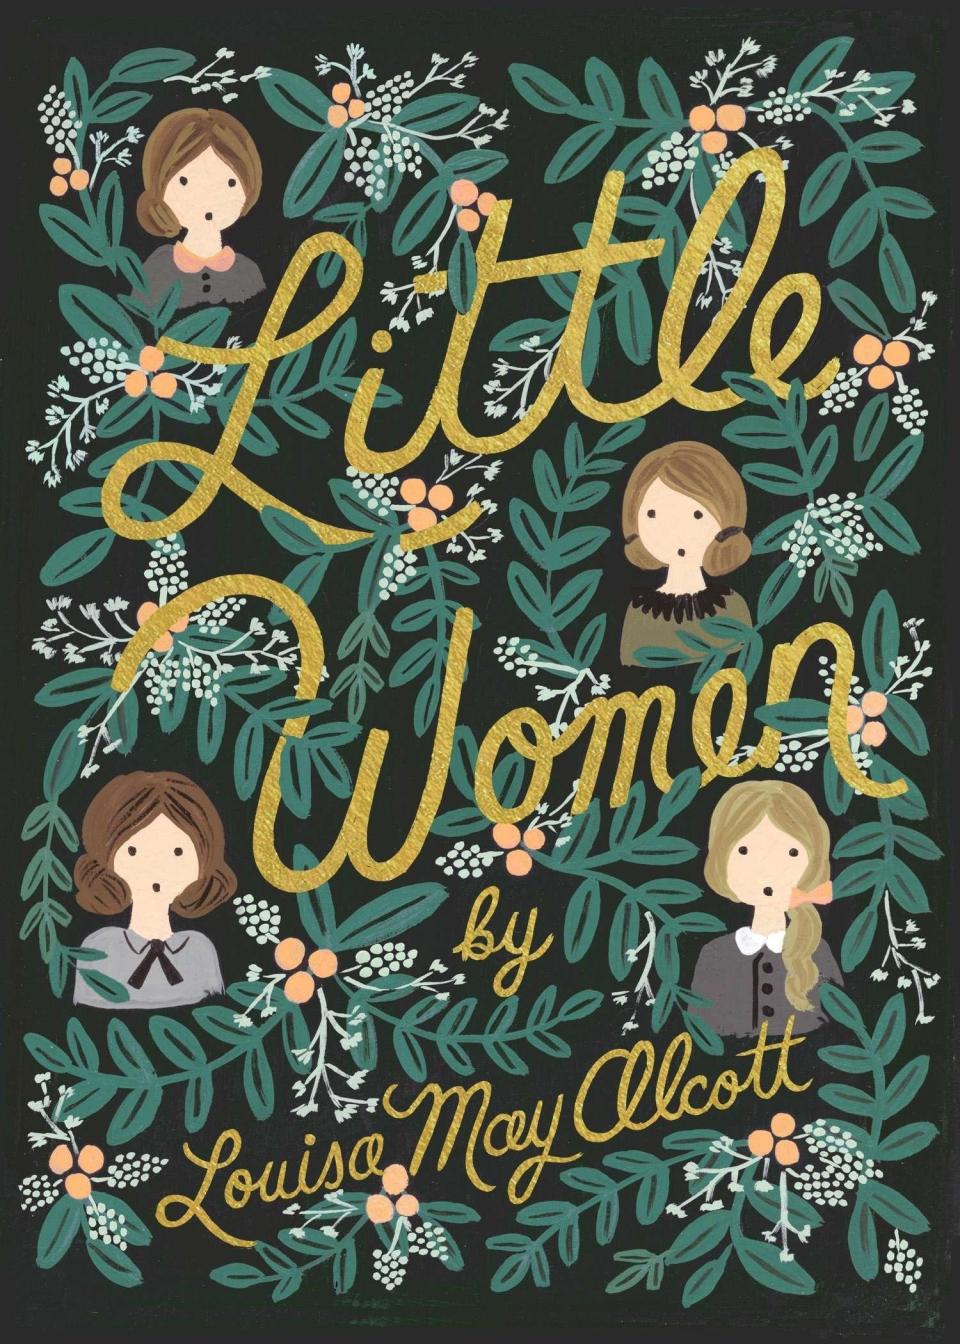 The cover of "Little Women" by Louisa May Alcott.